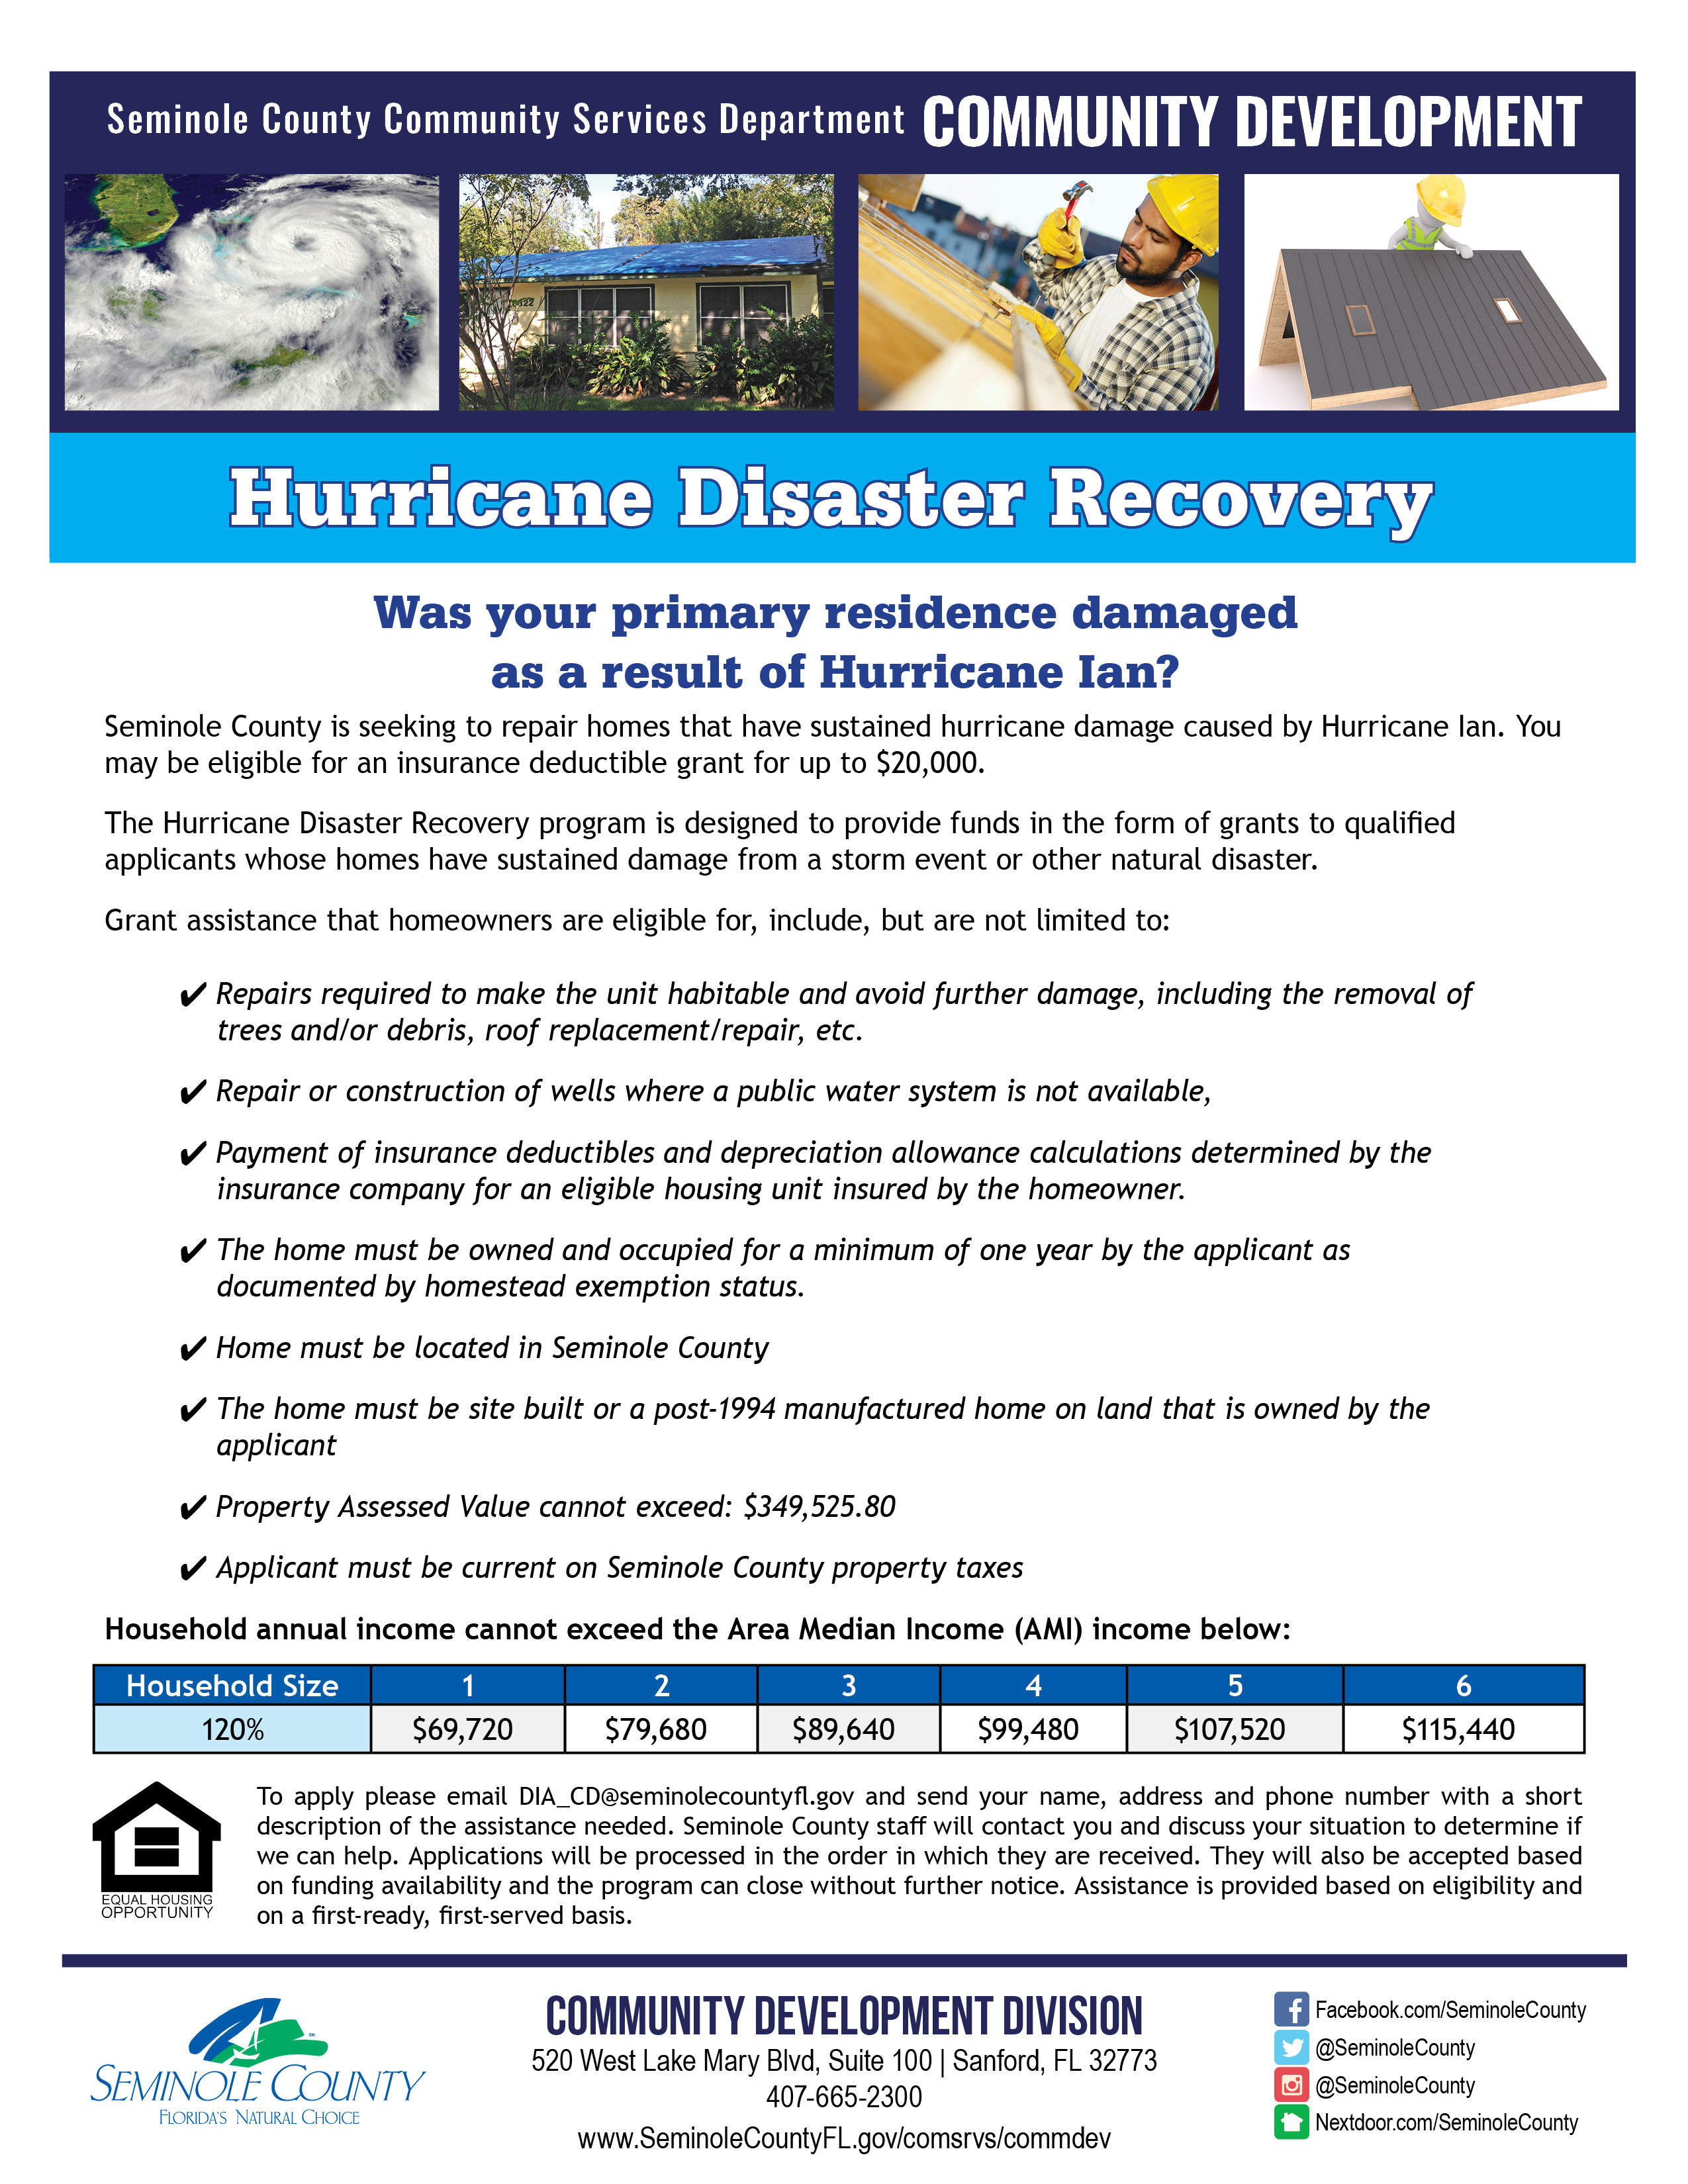 Seminole County Hurricane Disaster Recovery Assistance